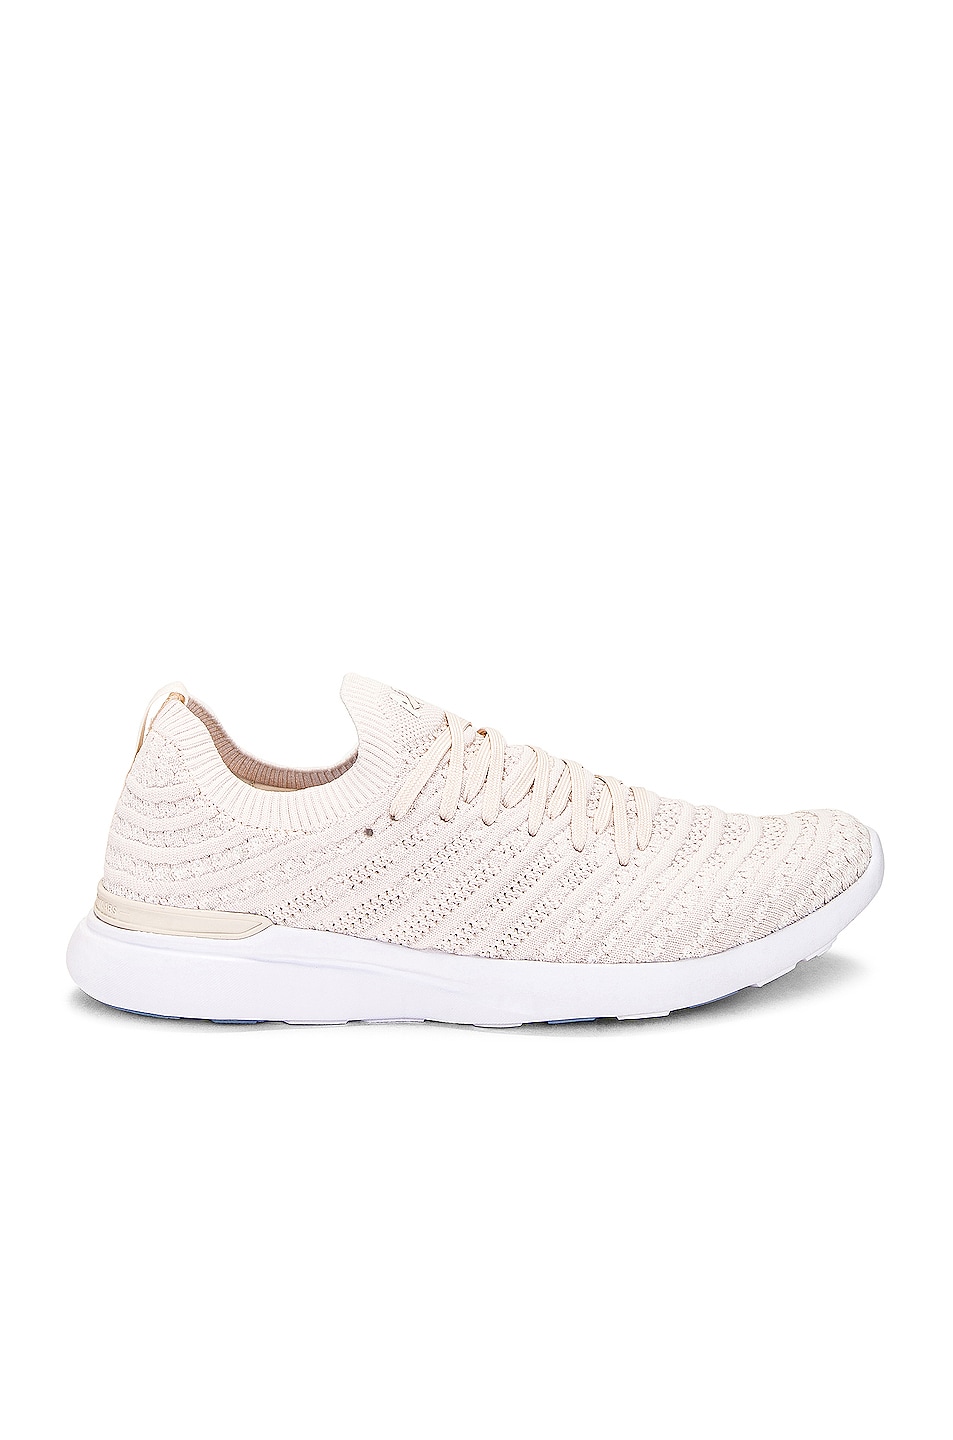 Image 1 of APL: Athletic Propulsion Labs Techloom Wave Sneaker in Beach, Ivory & White